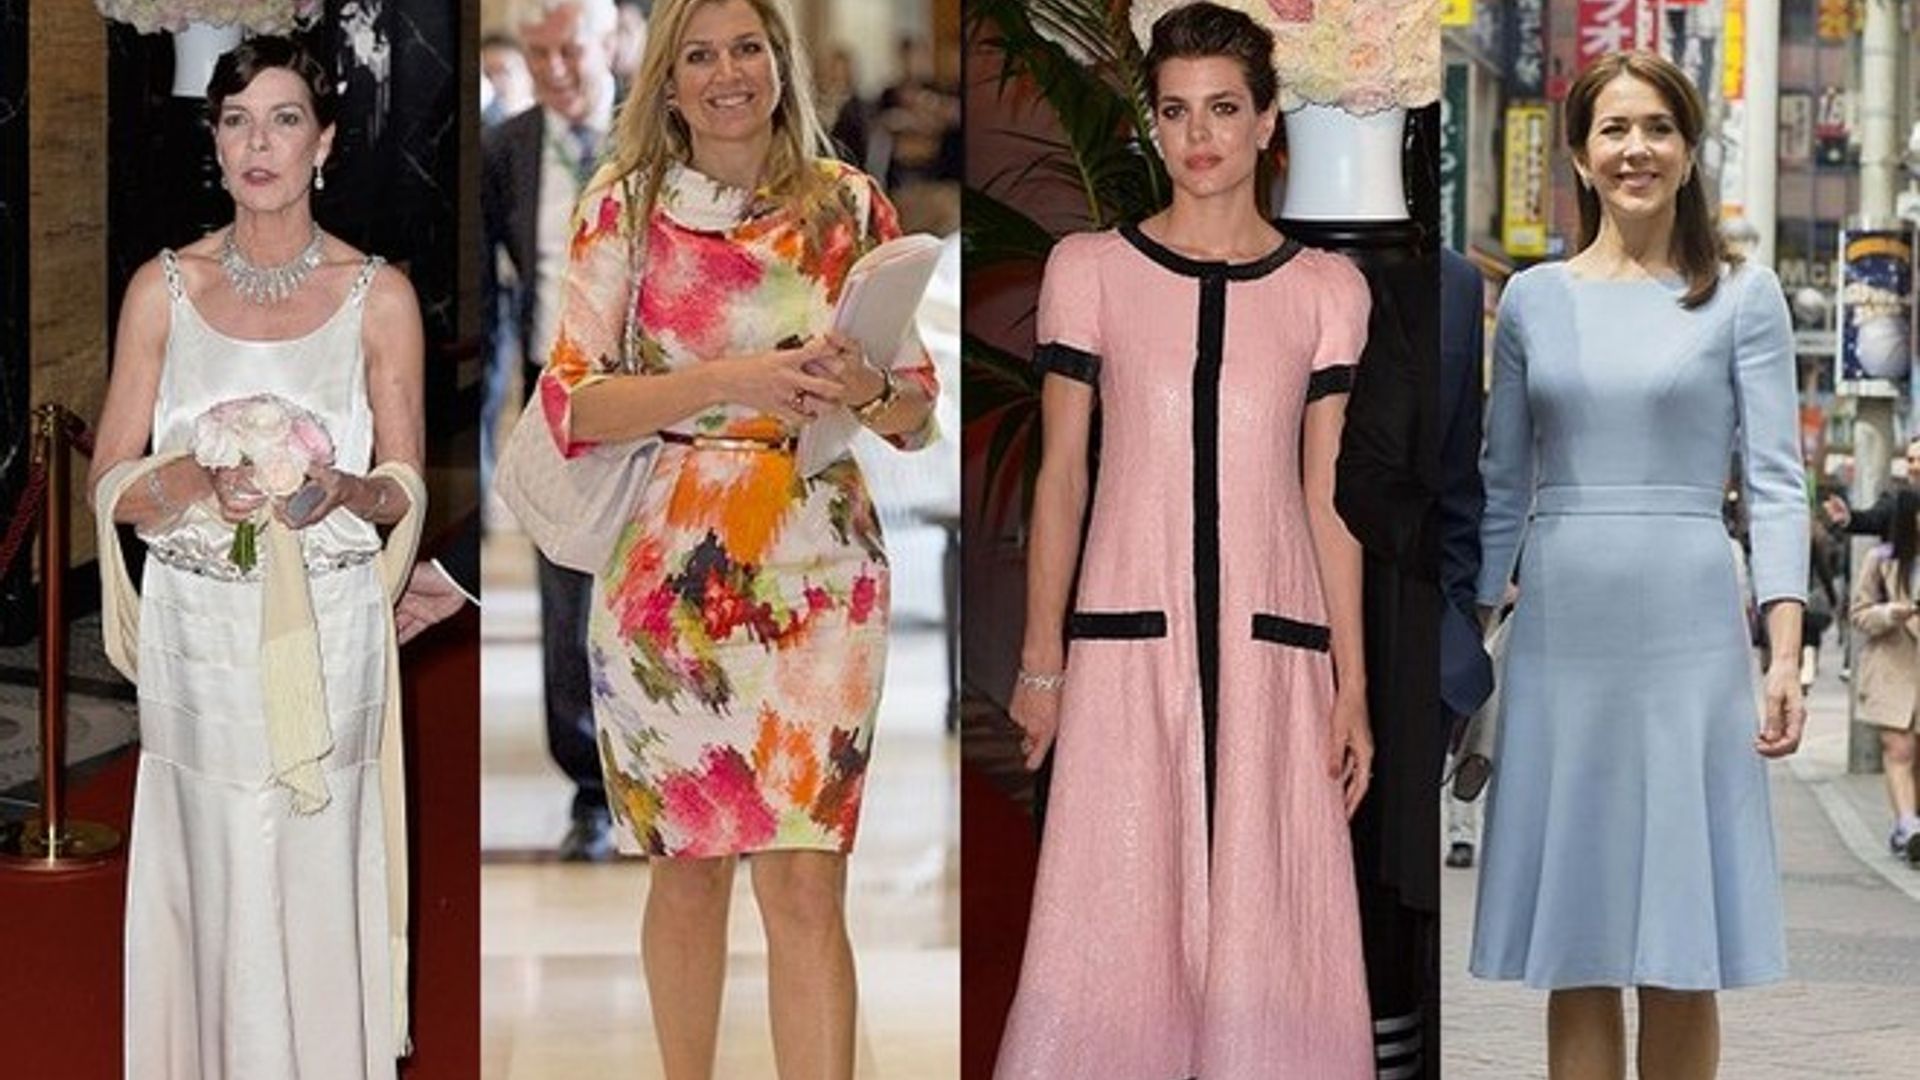 The week's best royal style: Queen Maxima, Charlotte Casiraghi, Princess Mary